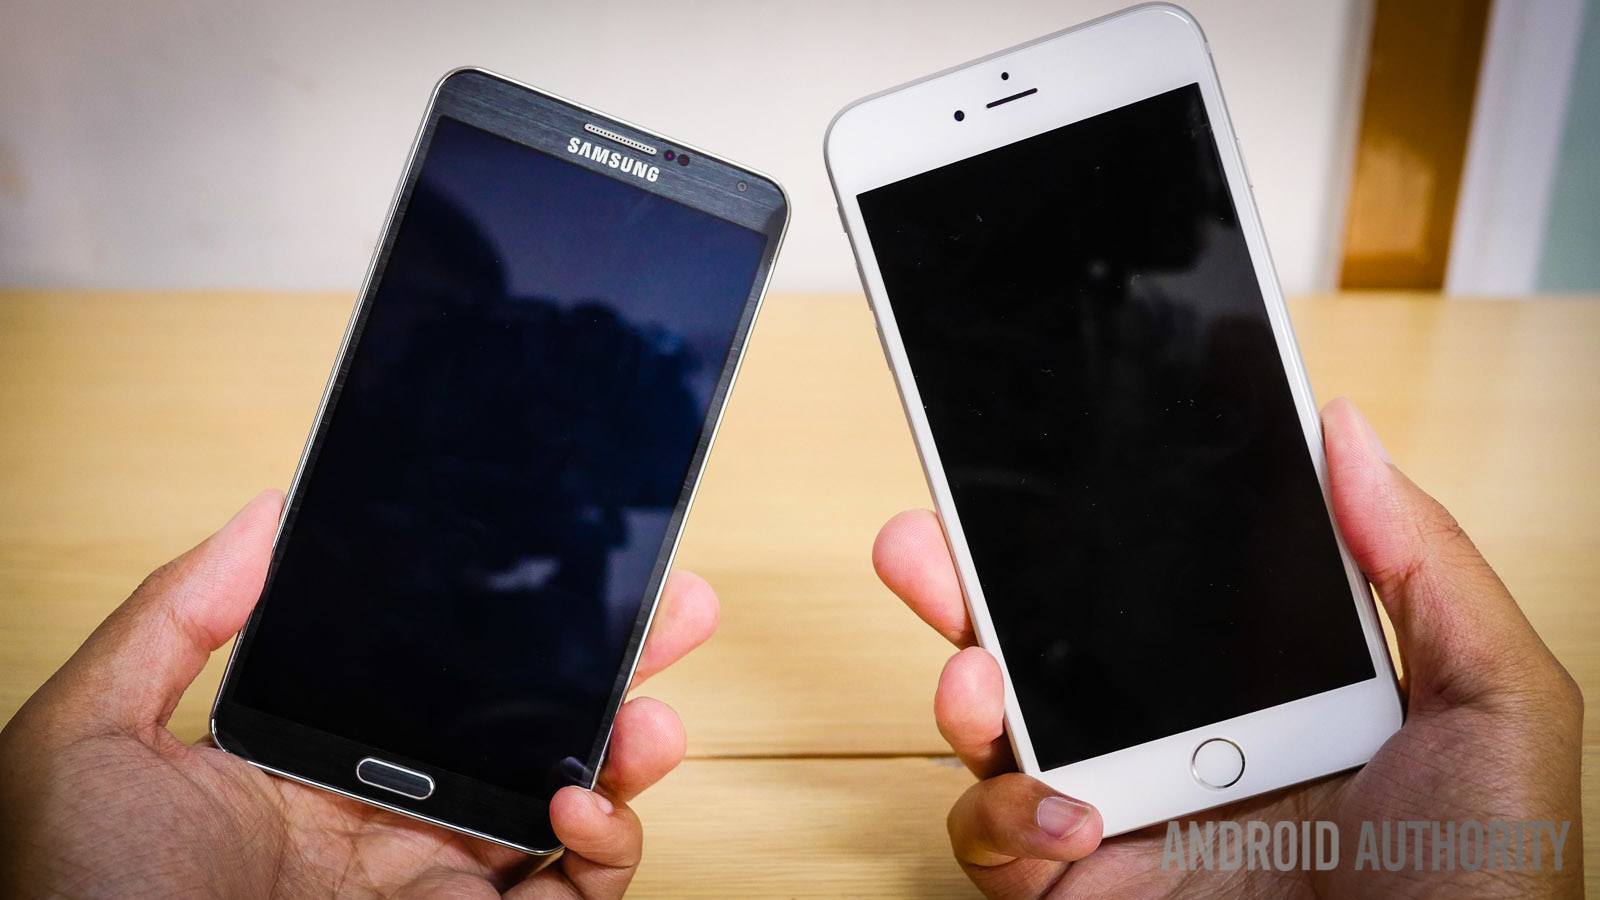 iphone 6 plus vs samsung galaxy note 3 quick look aa (6 of 20)